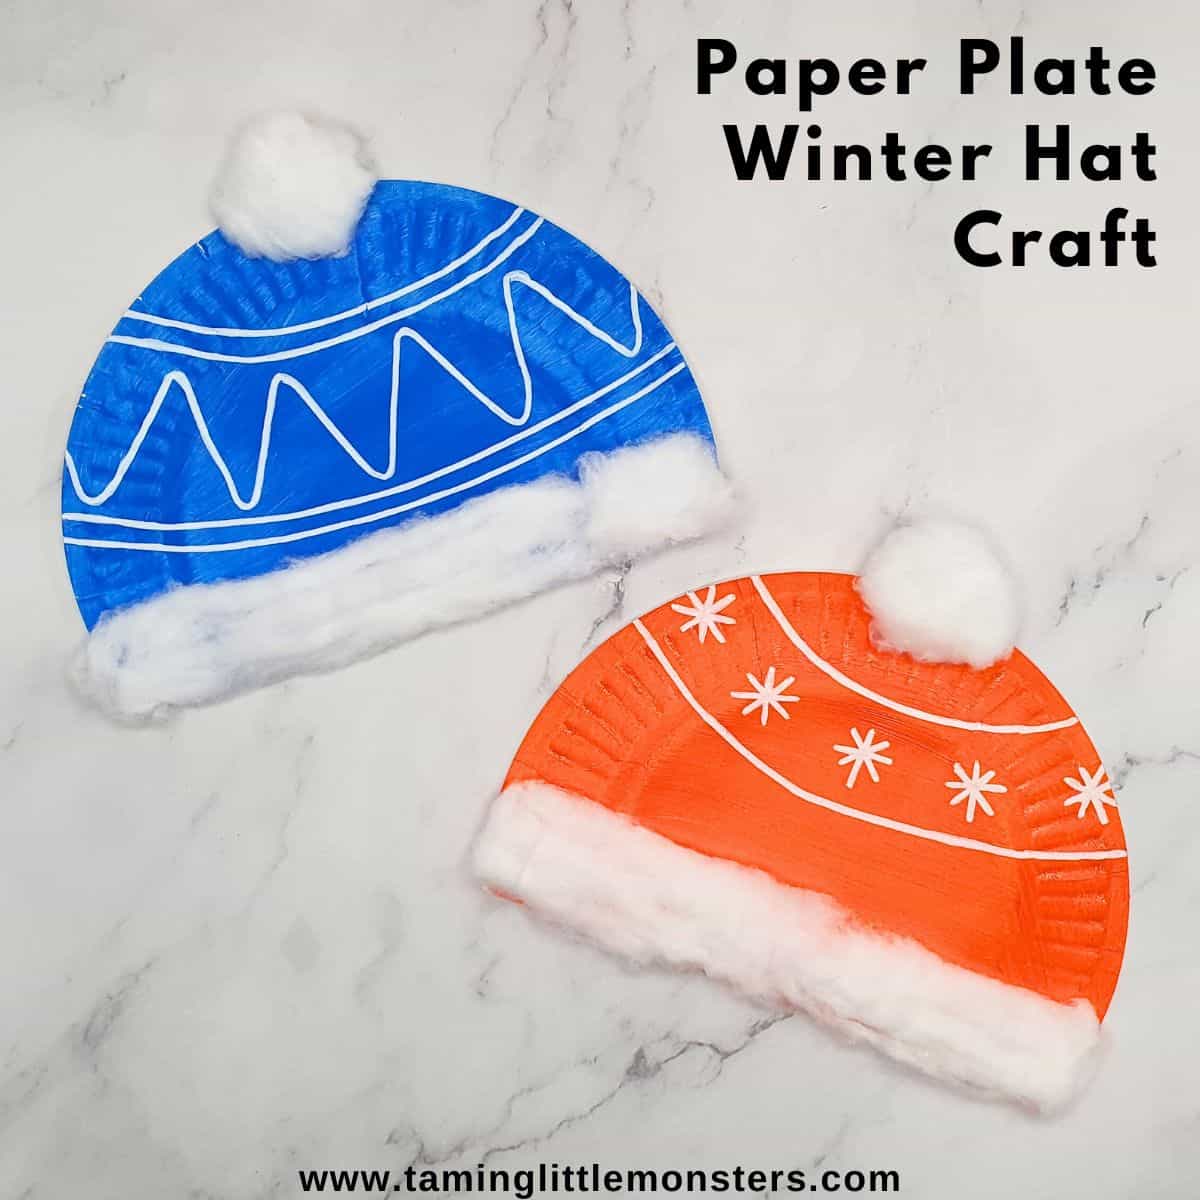 11 Best Winter Crafts for Kids that Anyone can Make